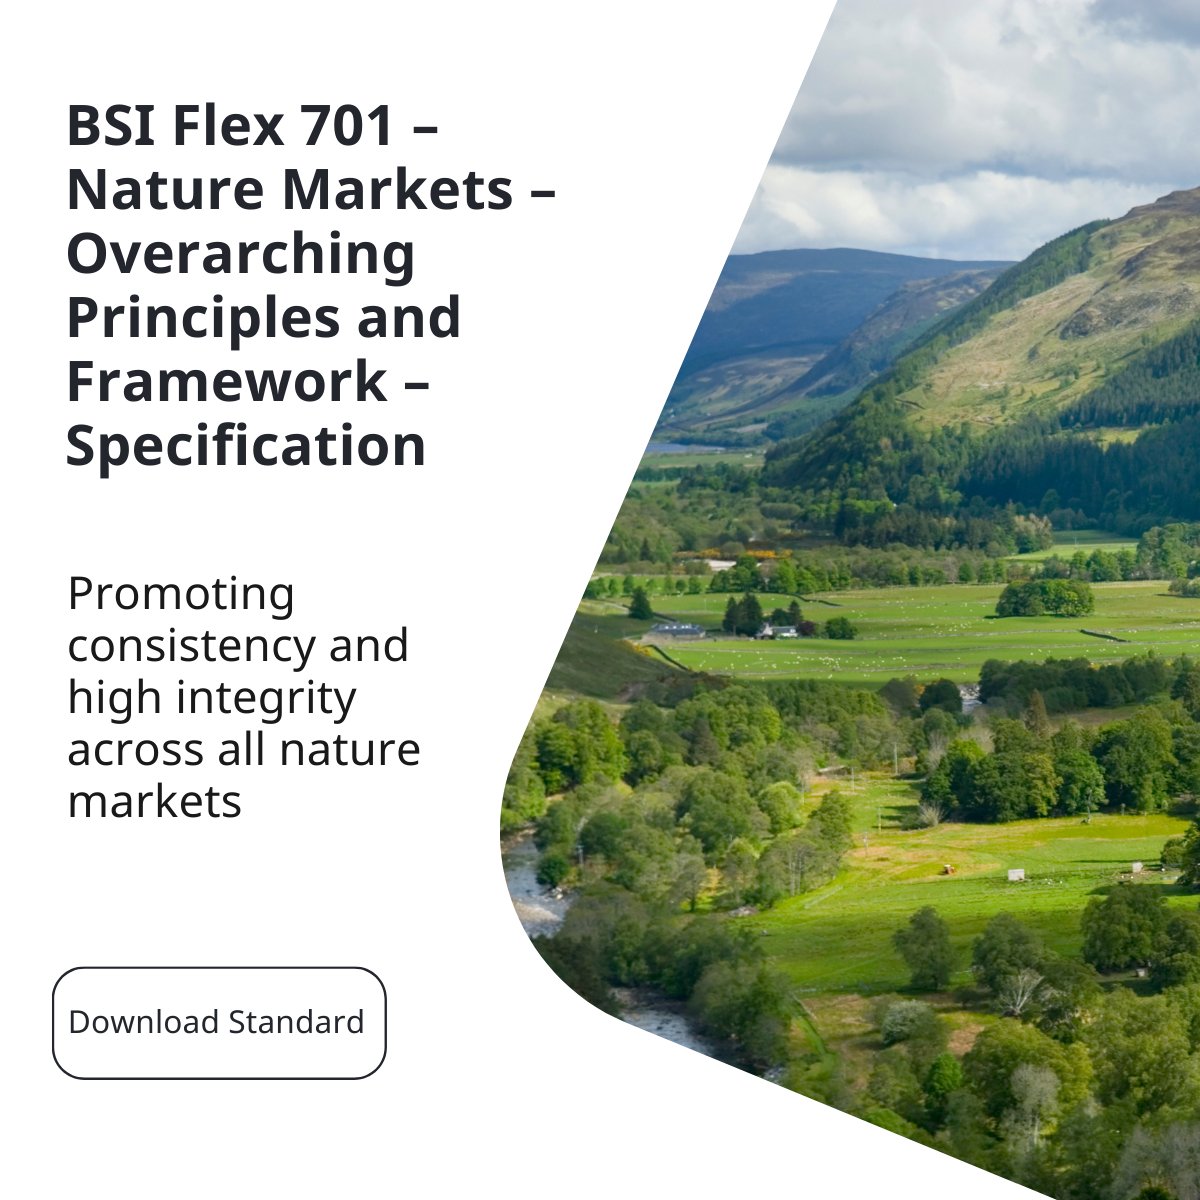 Announcing BSI Flex 701, a new standard promoting consistency and high integrity across all #NatureMarkets. Backed by @DefraGovUK, it provides requirements for designing and operating high-integrity nature markets. Get your free copy today: bit.ly/4a3rIUf #BSIStandards